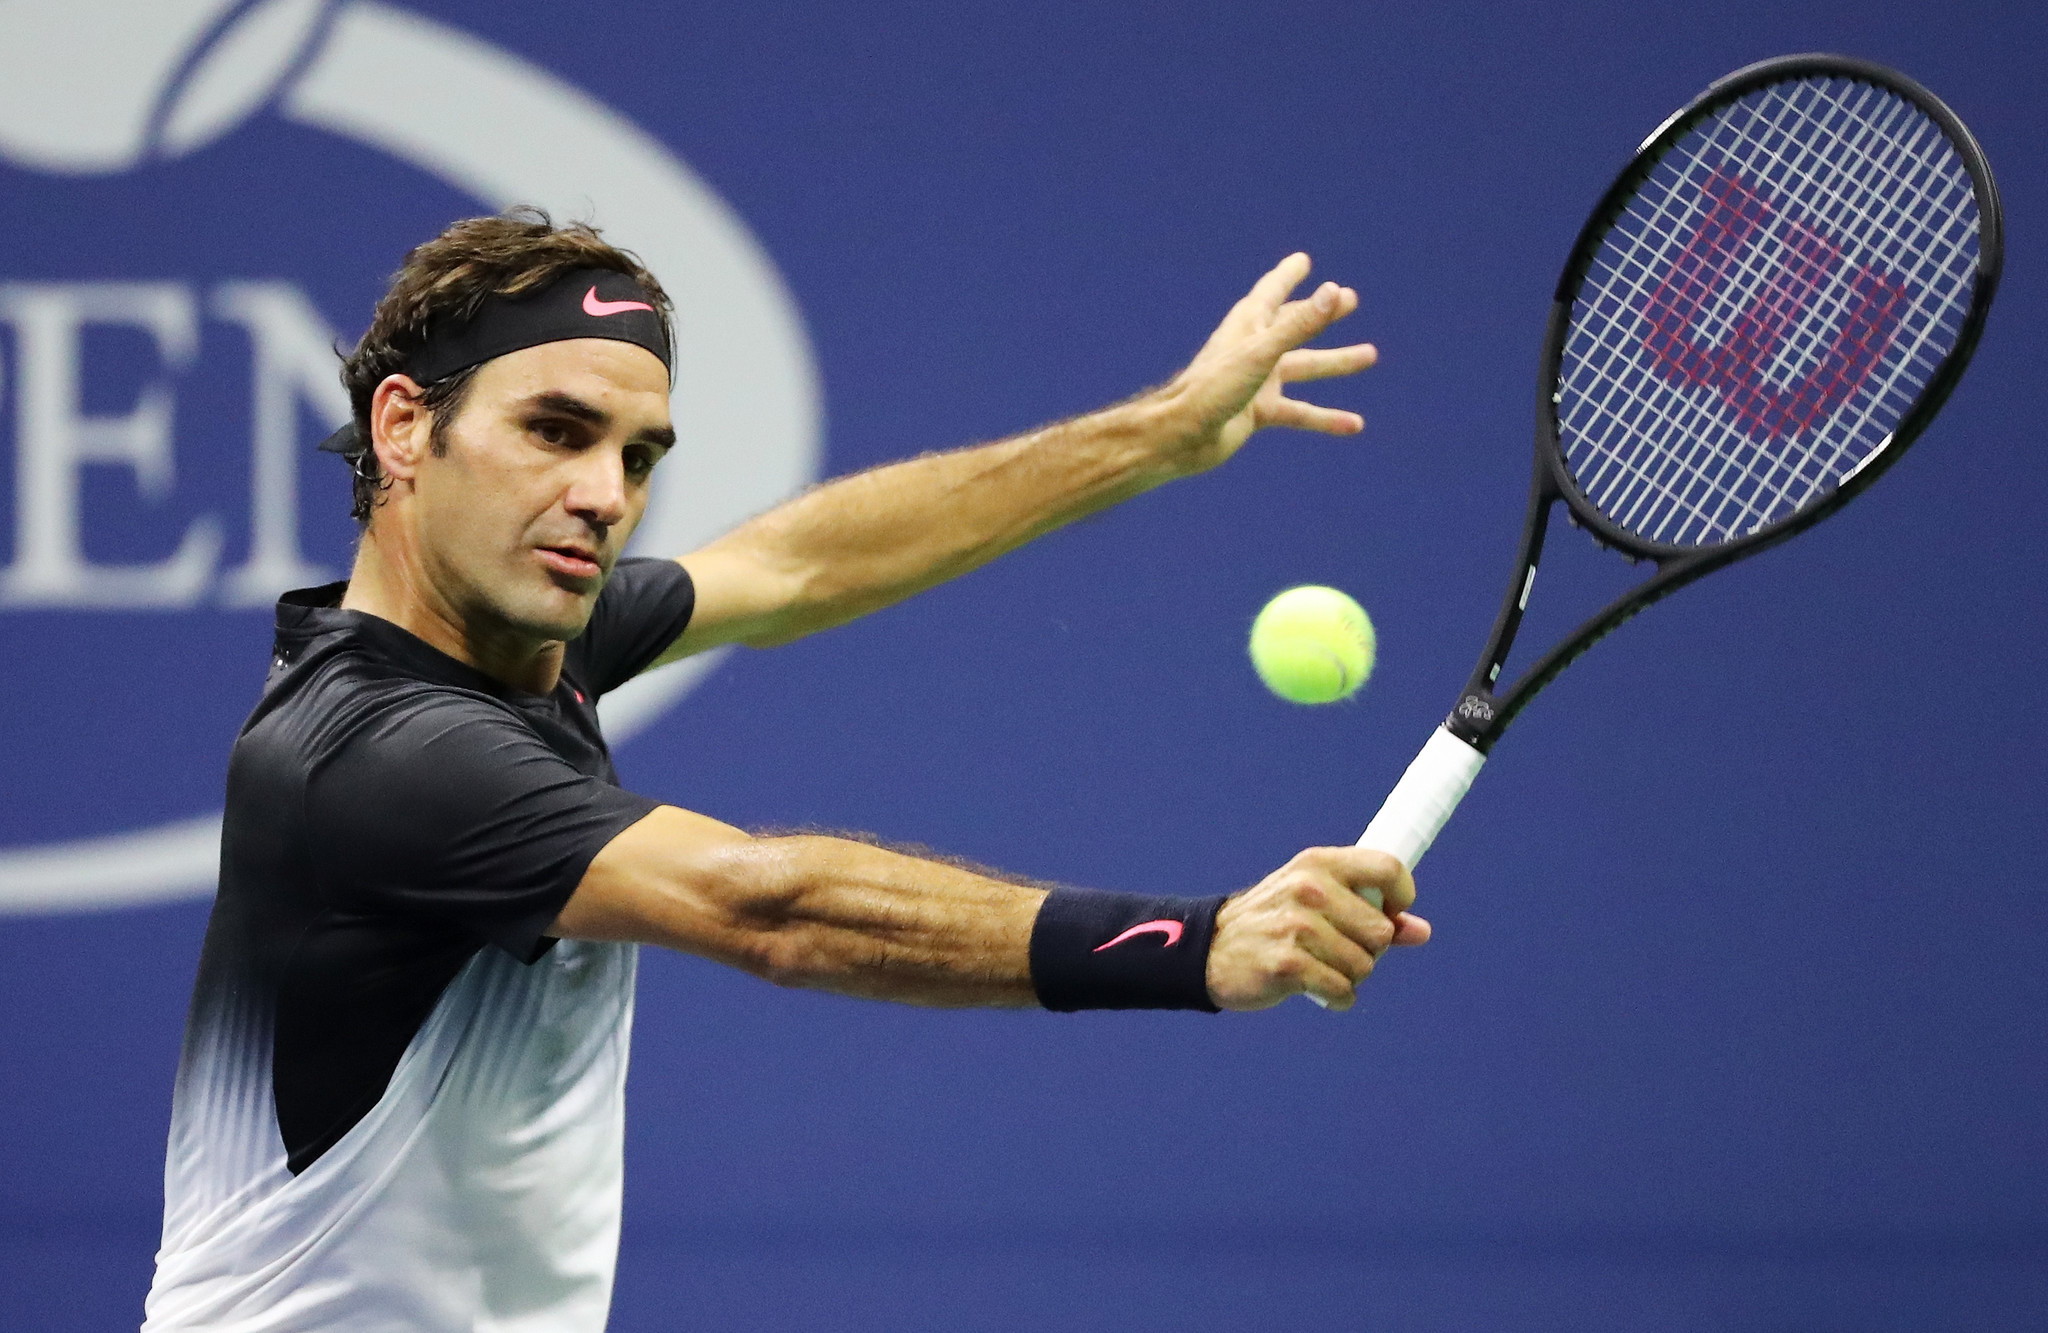 Roger Federer looks back at best in straight-sets win over Feliciano Lopez at US Open ...2048 x 1333